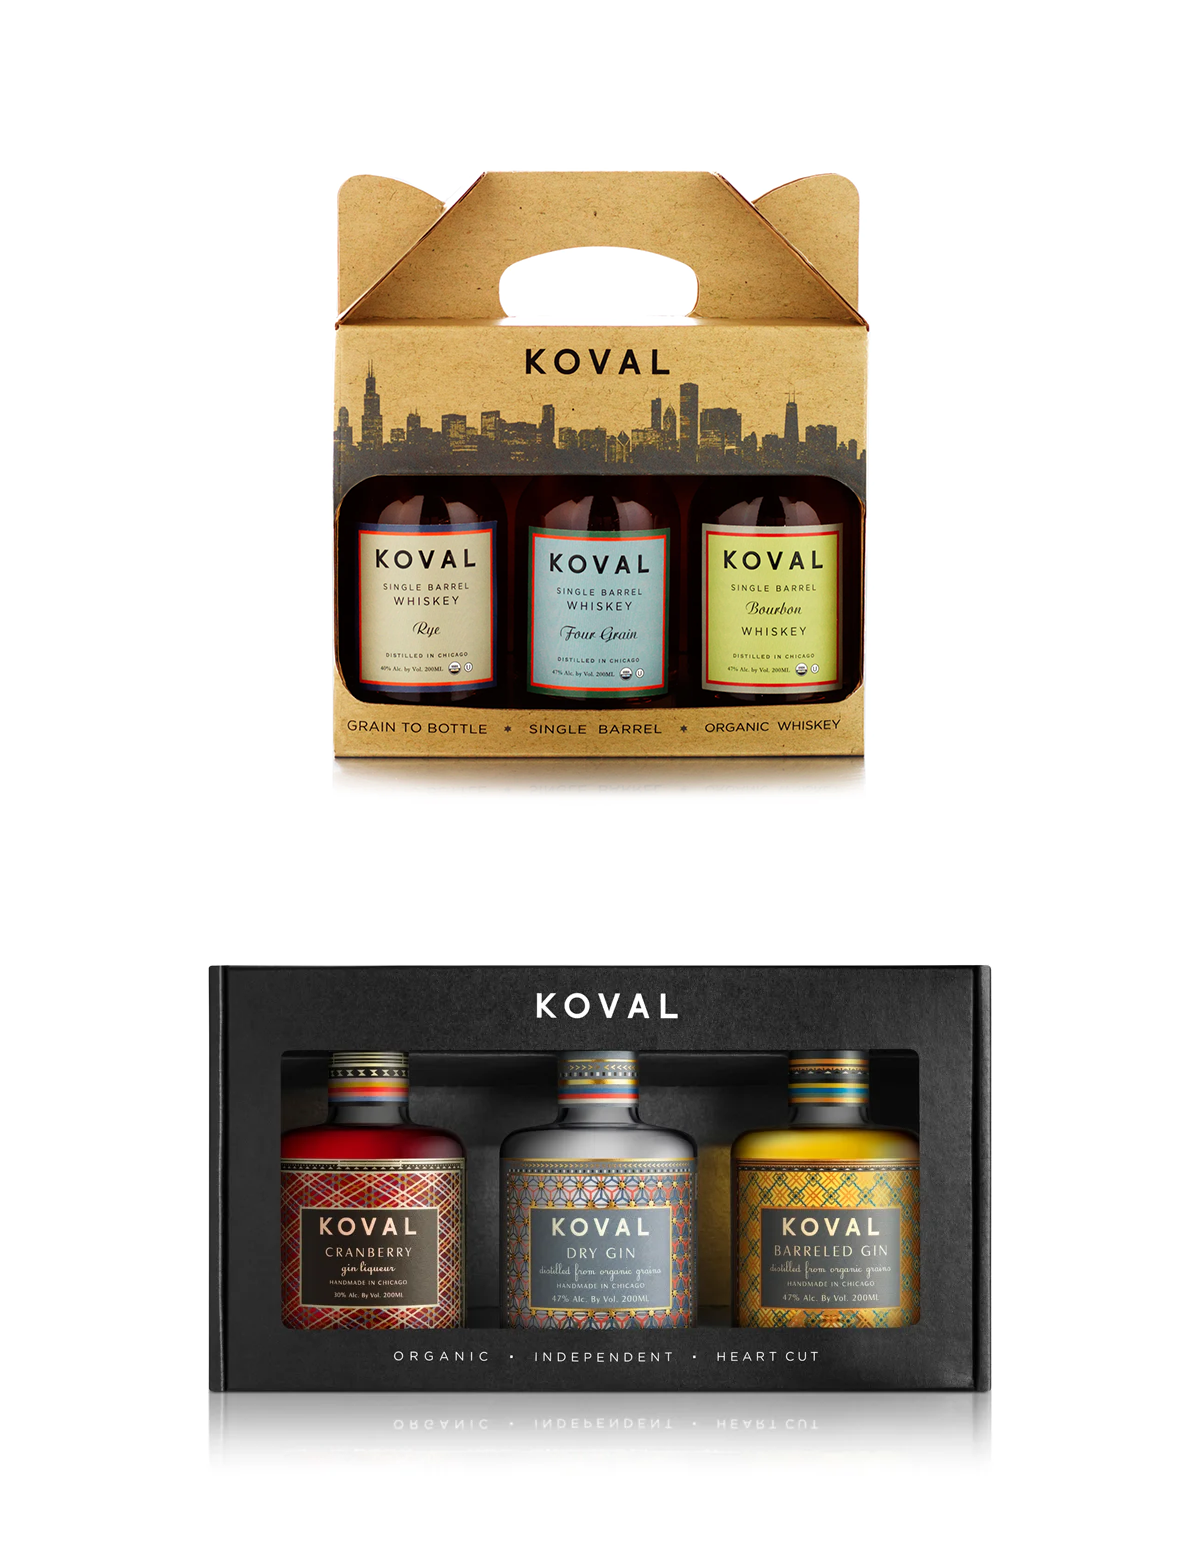 KOVAL whiskey and gin gift sets